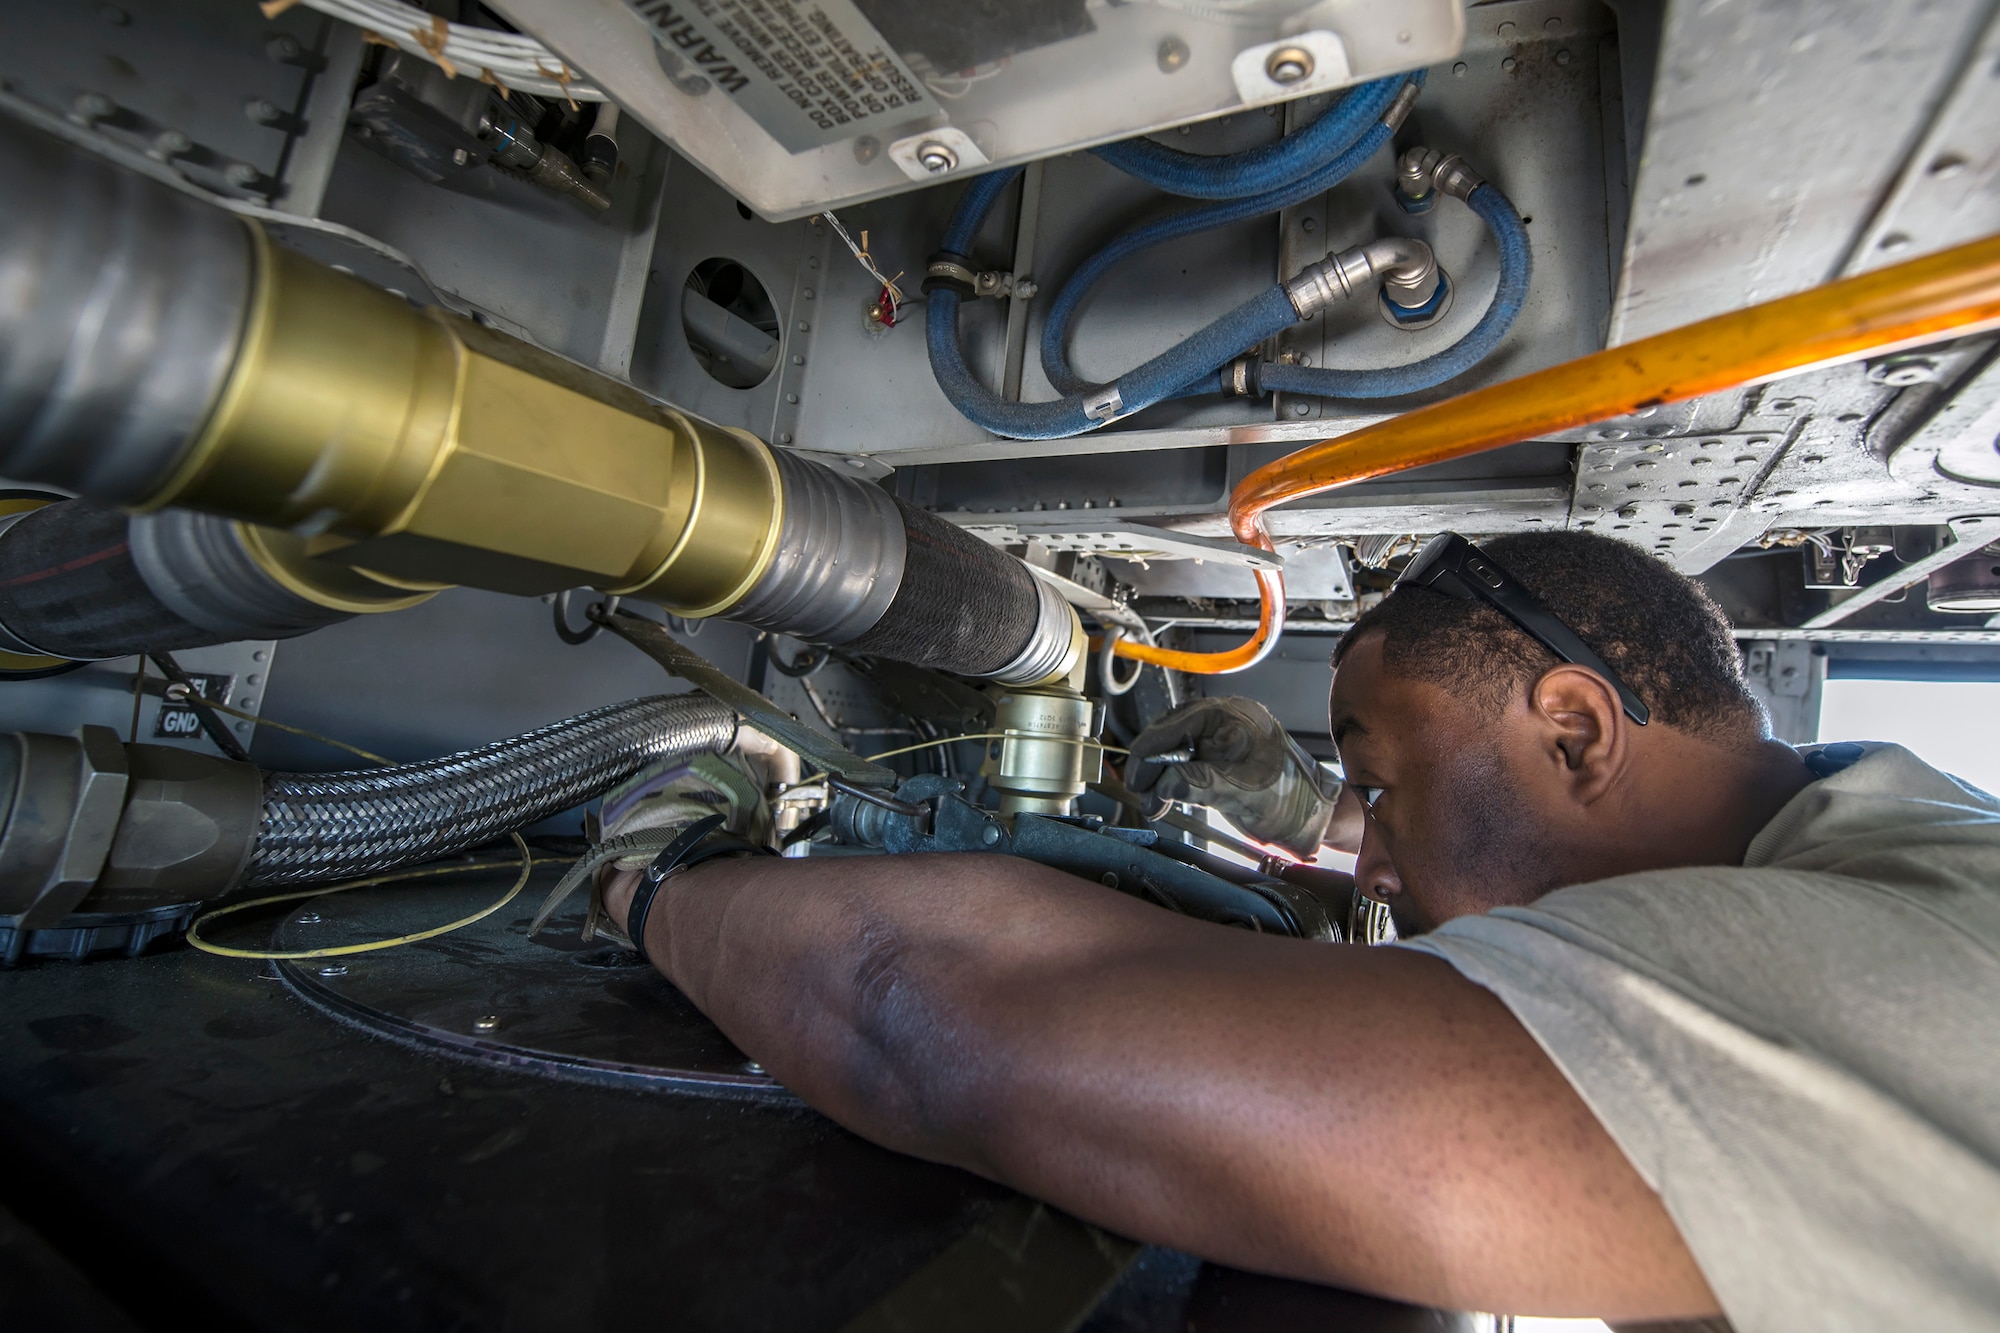 Senior Airman Latrell Solomon, 41st Rescue Squadron (RQS) special missions aviator, gauges the fuel tank of an HH-60G Pave Hawk, March 15, 2018, at Moody Air Force Base, Ga. Airmen from the 41st RQS and 723d Aircraft Maintenance Squadron conducted pre-flight checks to ensure that an HH-60G Pave Hawk was fully prepared for a simulated combat search and rescue mission. (U.S. Air Force photo by Airman Eugene Oliver)